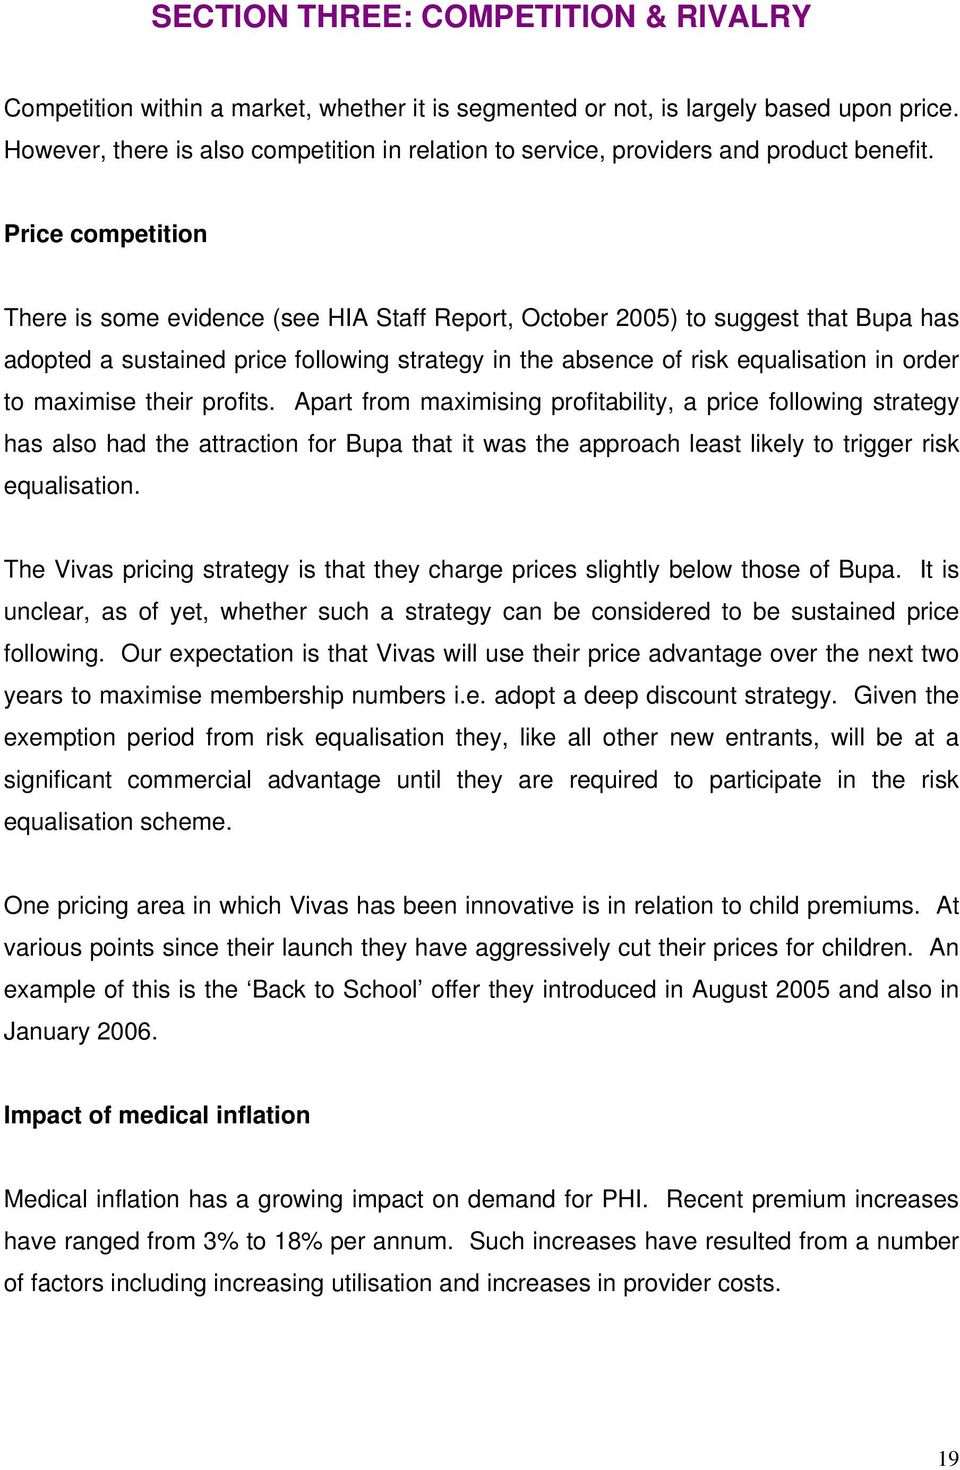 Price competition There is some evidence (see HIA Staff Report, October 2005) to suggest that Bupa has adopted a sustained price following strategy in the absence of risk equalisation in order to